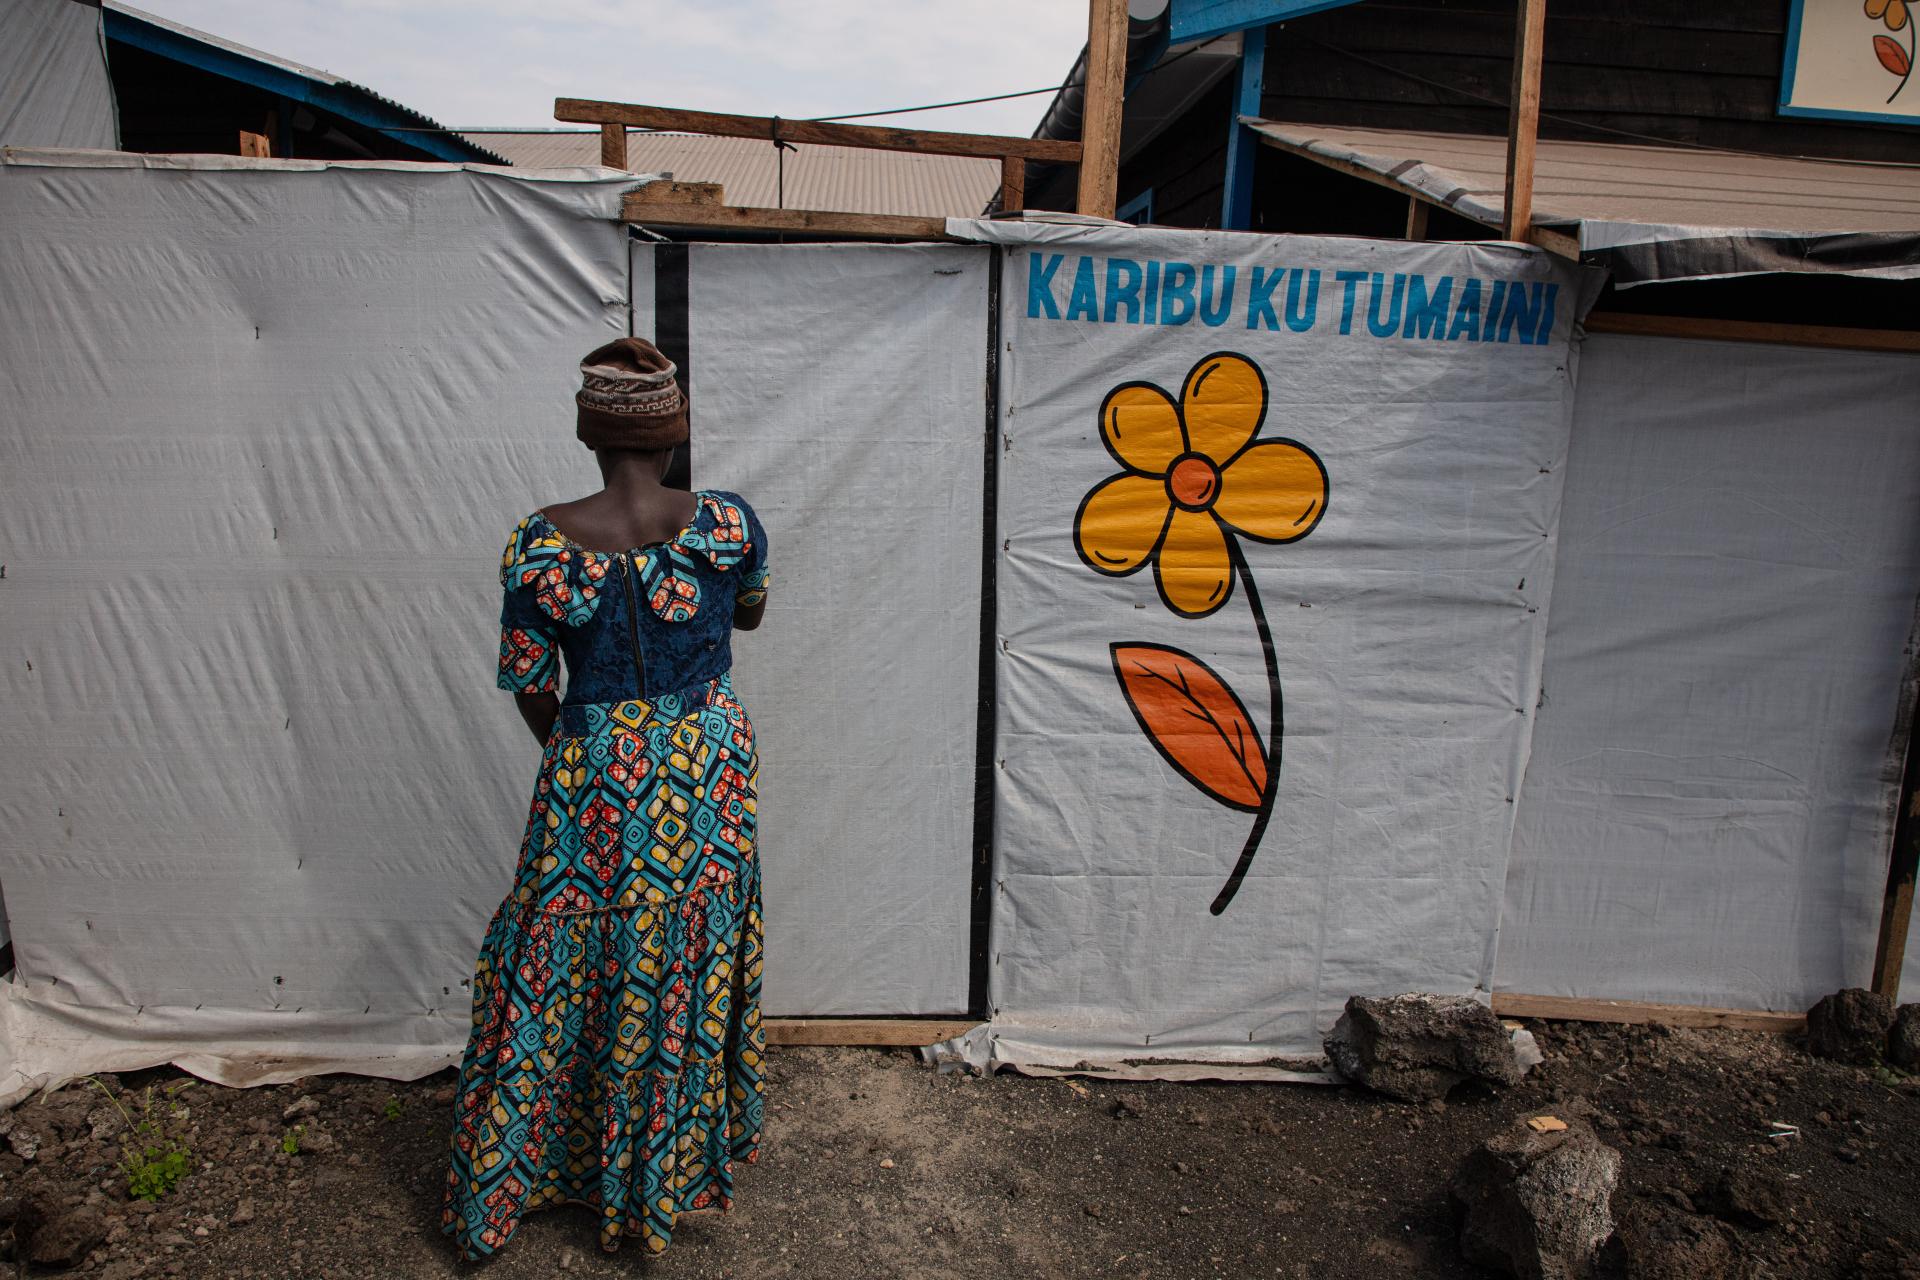 North-Kivu / DRC: The daily struggles of women in Goma’s displacement camps